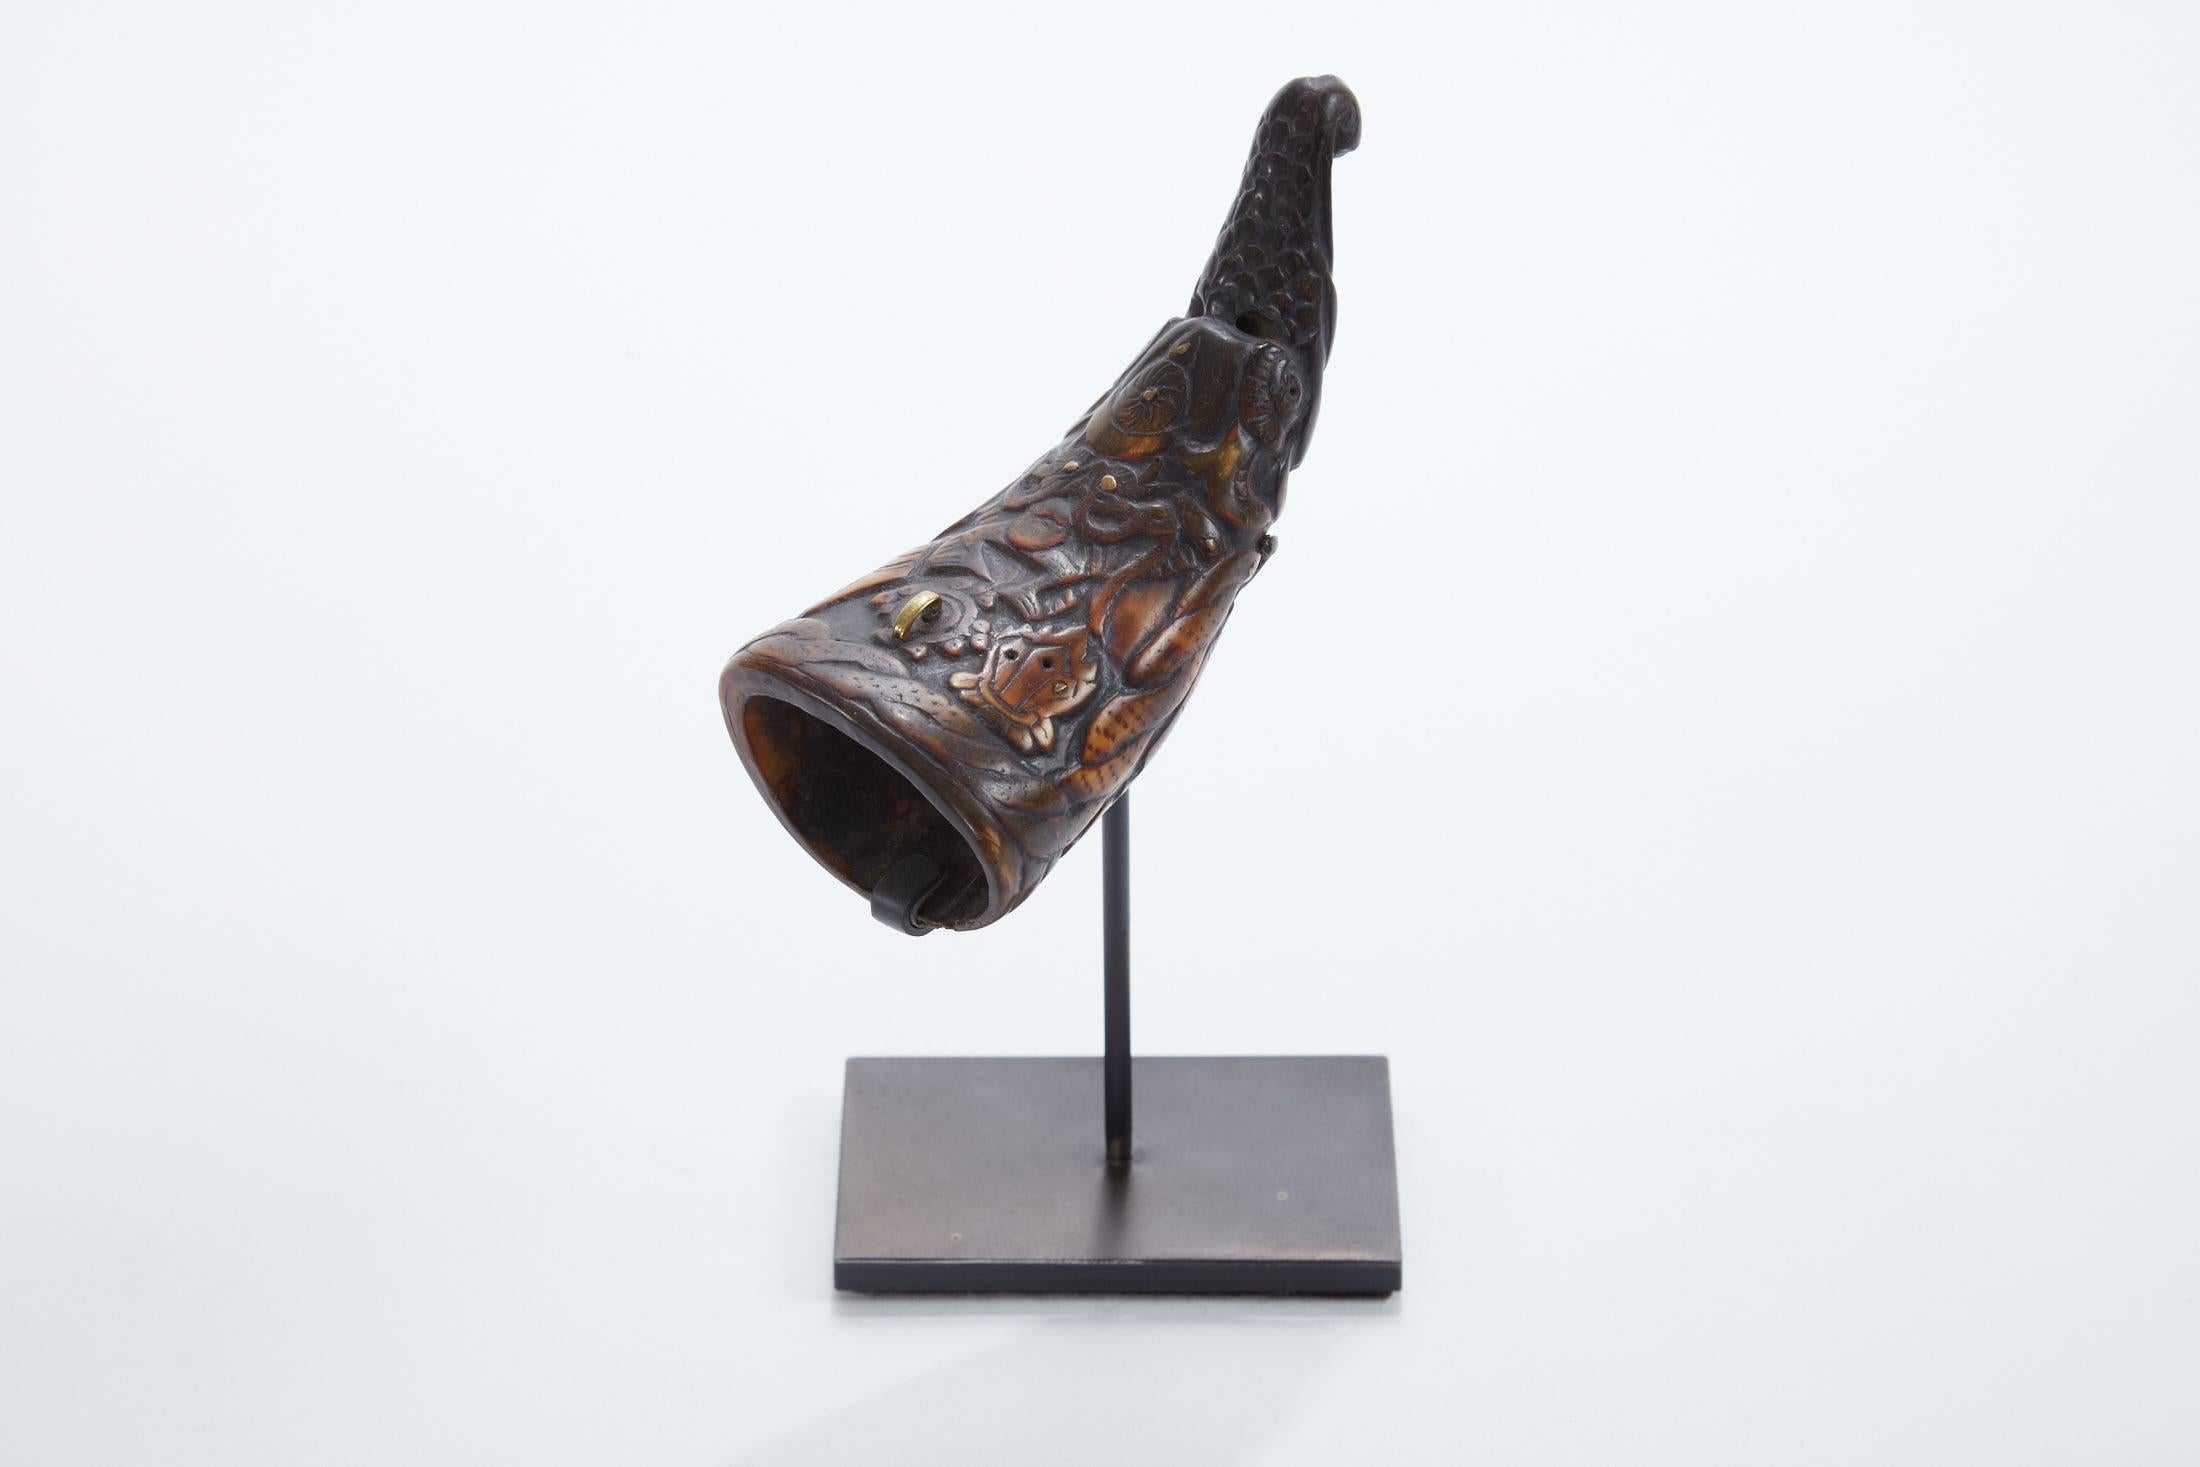 Late 19th century hand-carved 'Thun Rwa' horn was used commonly by the Ngakpa (lay Lamas) of Tibet. Used as a healing tool with medicinal/herbal powders, the tribe 